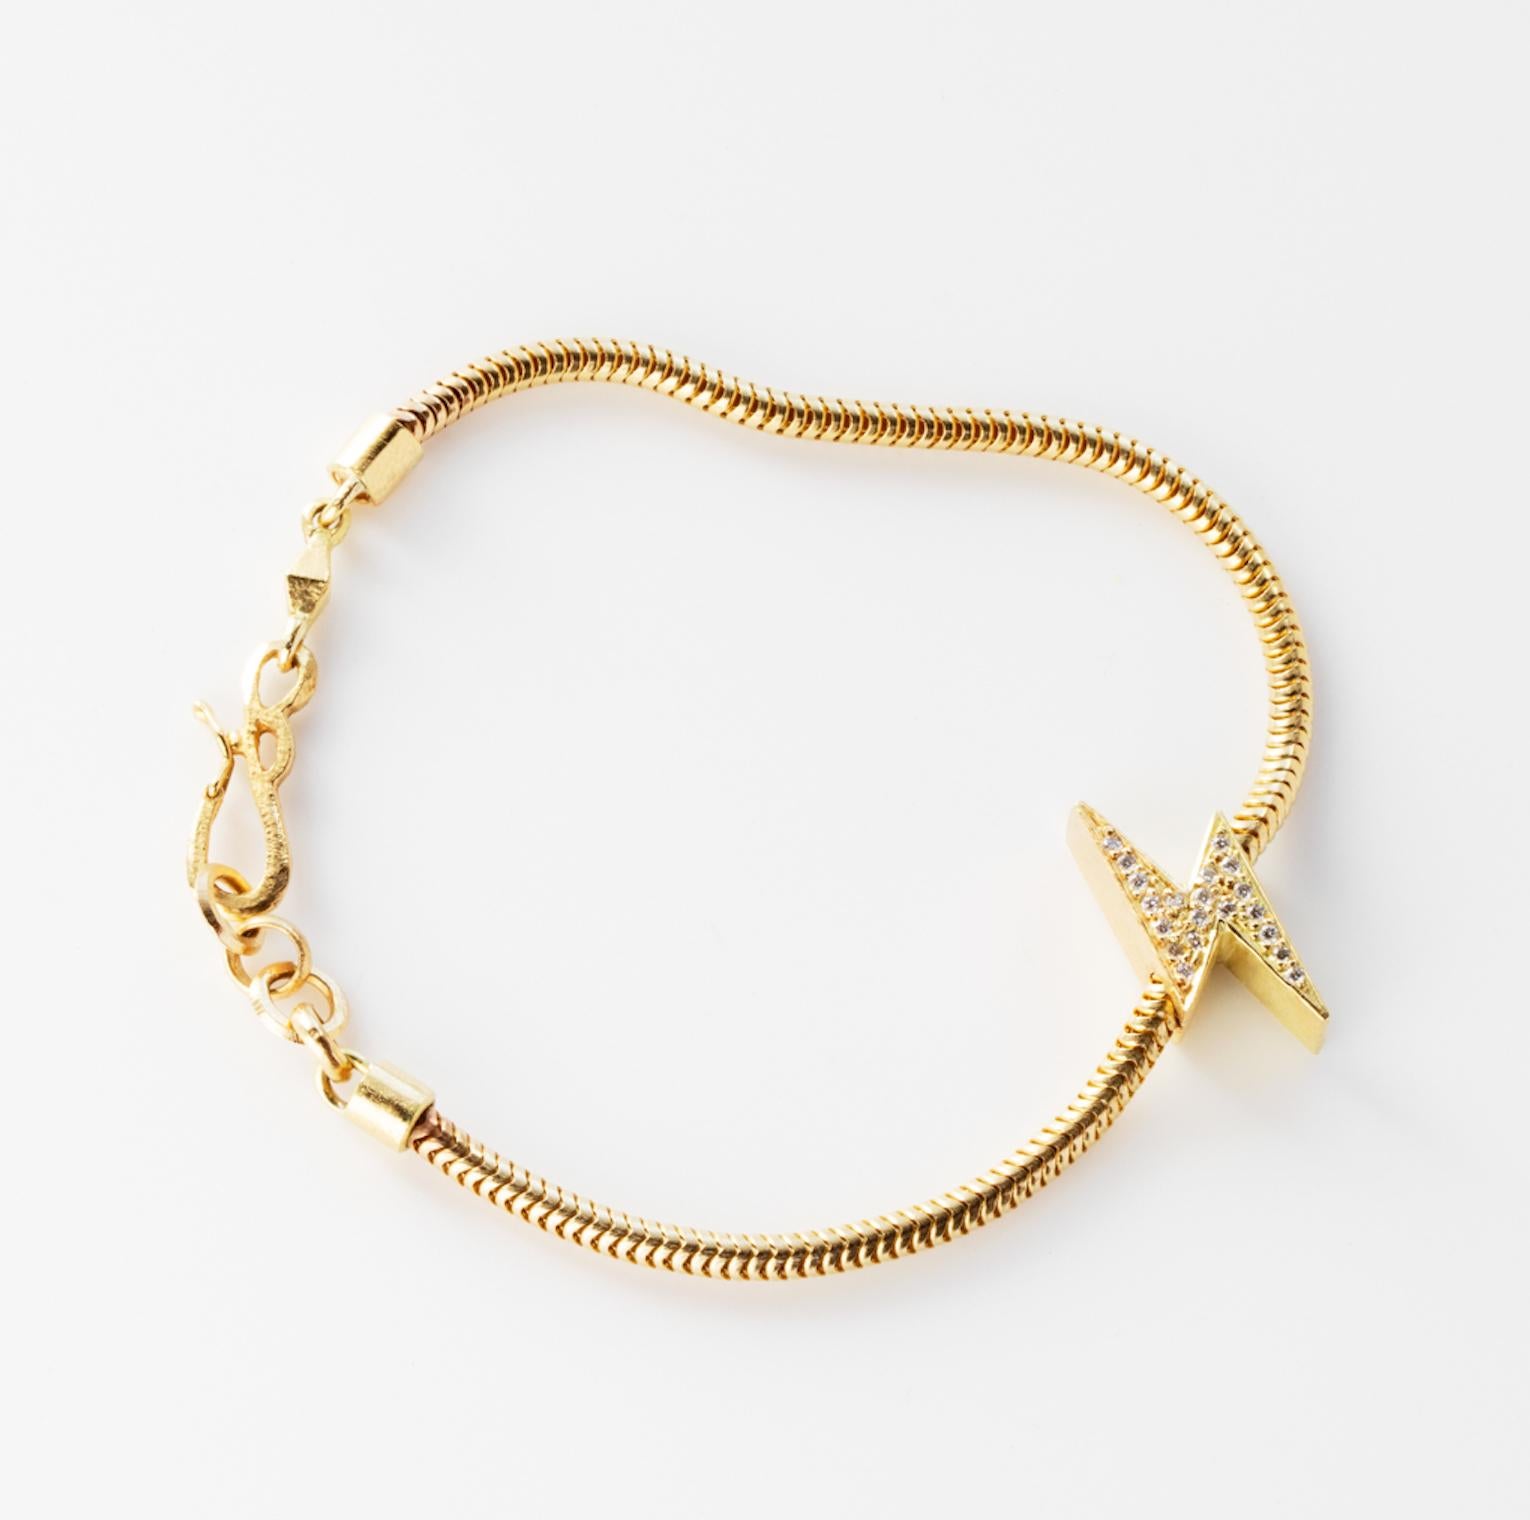 18k Lightening Bolt Snake Chain Bracelet features a White Diamond pave Lightening Bolt charm secured onto a solid gold snake chain bracelet, along with a clasp closure that secures the bracelet onto the wearer's wrist. 
18k Yellow Gold, White